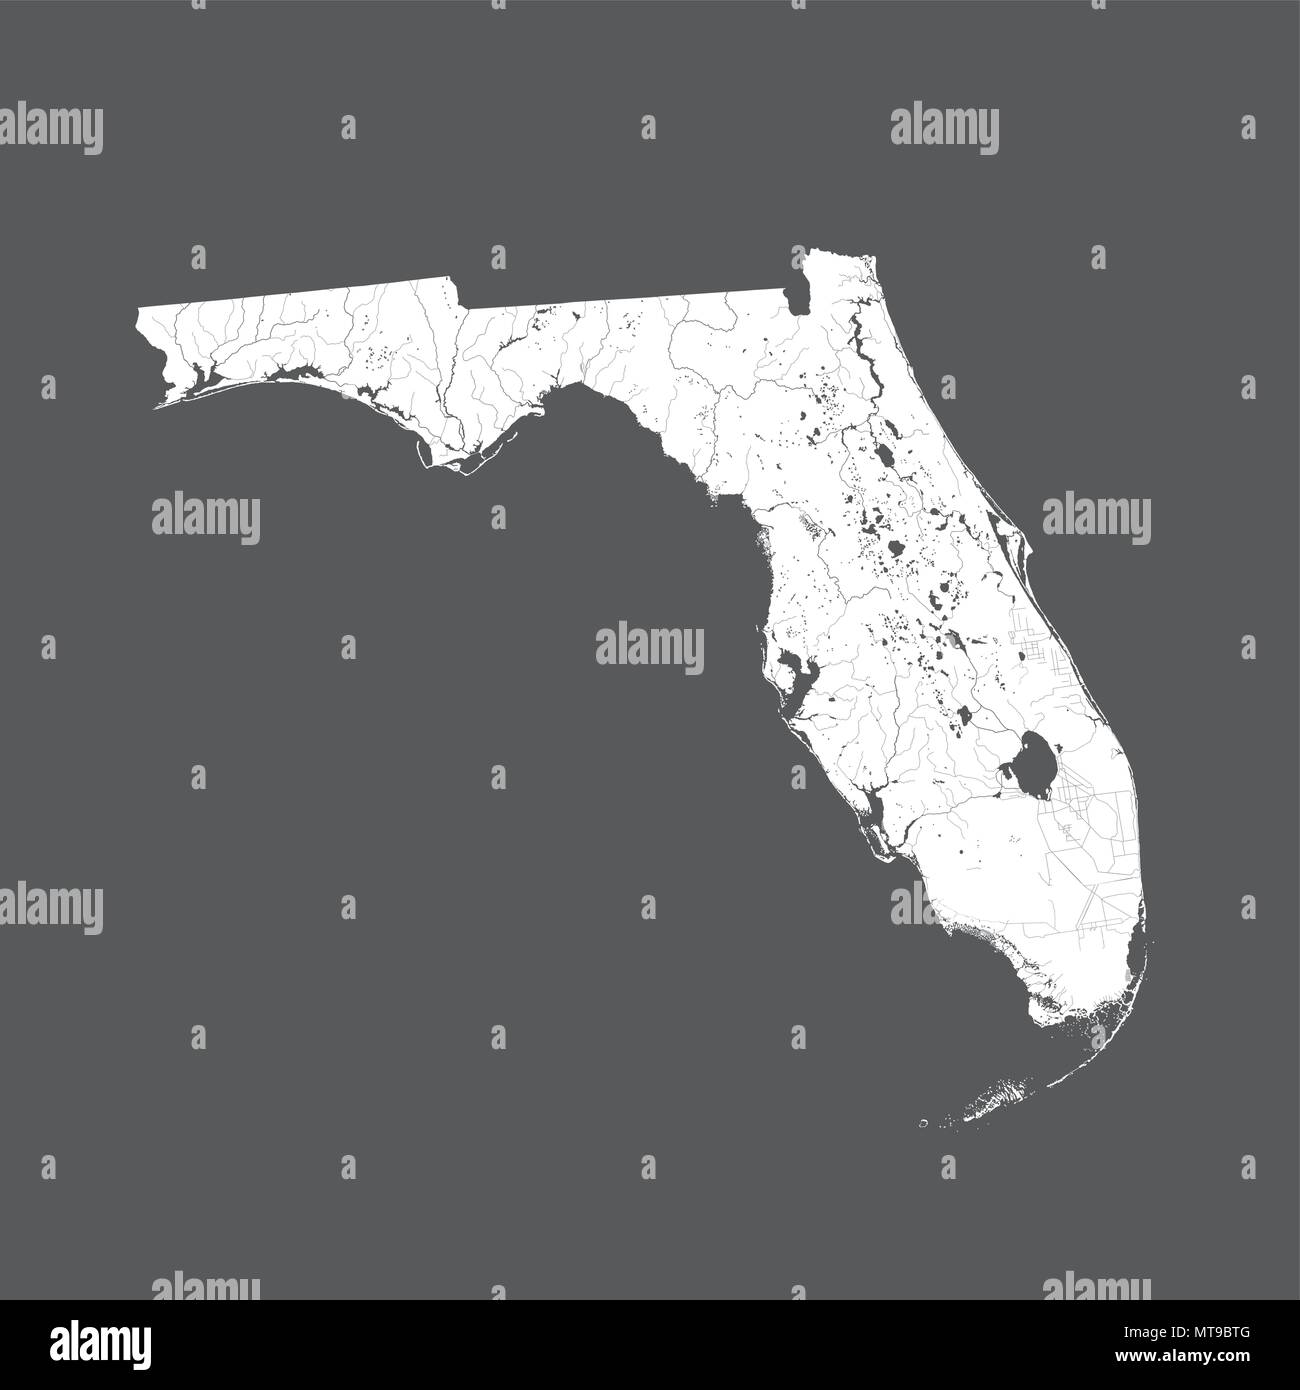 U.S. states - map of Florida. Hand made. Rivers and lakes are shown. Please look at my other images of cartographic series - they are all very detaile Stock Vector